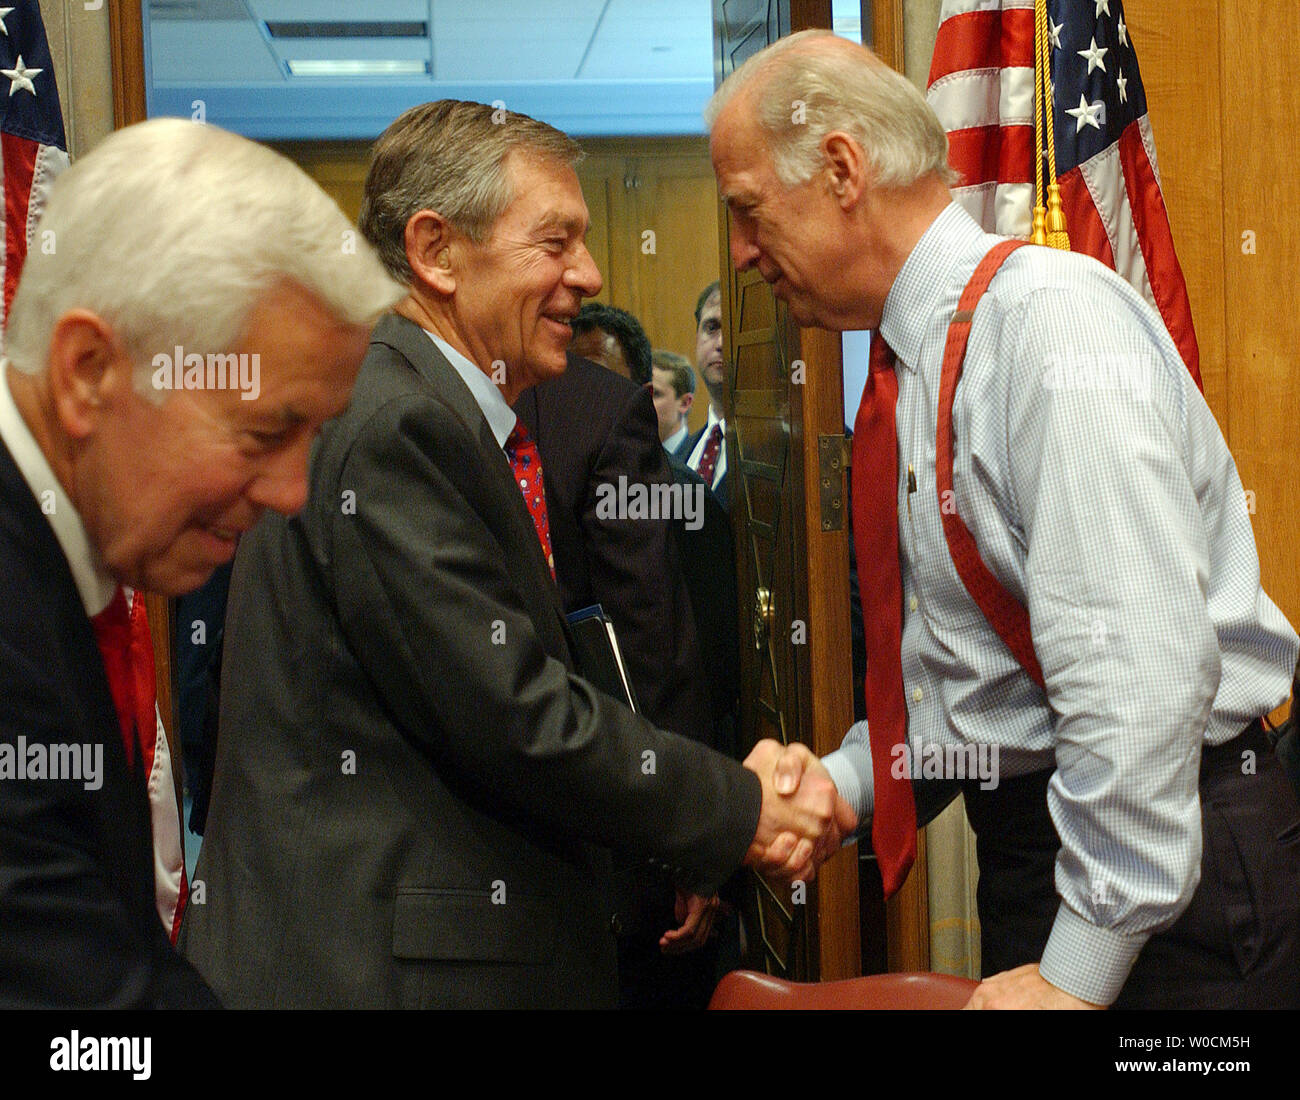 Sen. George Voinovich, R-OH, shakes hands with Sen. Joe Biden, D-CT as Sen. Richard Lugar, R-IN) prepares to exit after a Senate Foreign Relations Committee meeting to vote on the nomination of John Bolton to be the U.S. ambassador to the U.N. on May 12, 2005, on Capitol Hill in Washington. Voinovich opposes Bolton, but voted to allow the full Senate to vote on the nomination.   (UPI Photo/Roger L. Wollenberg) Stock Photo